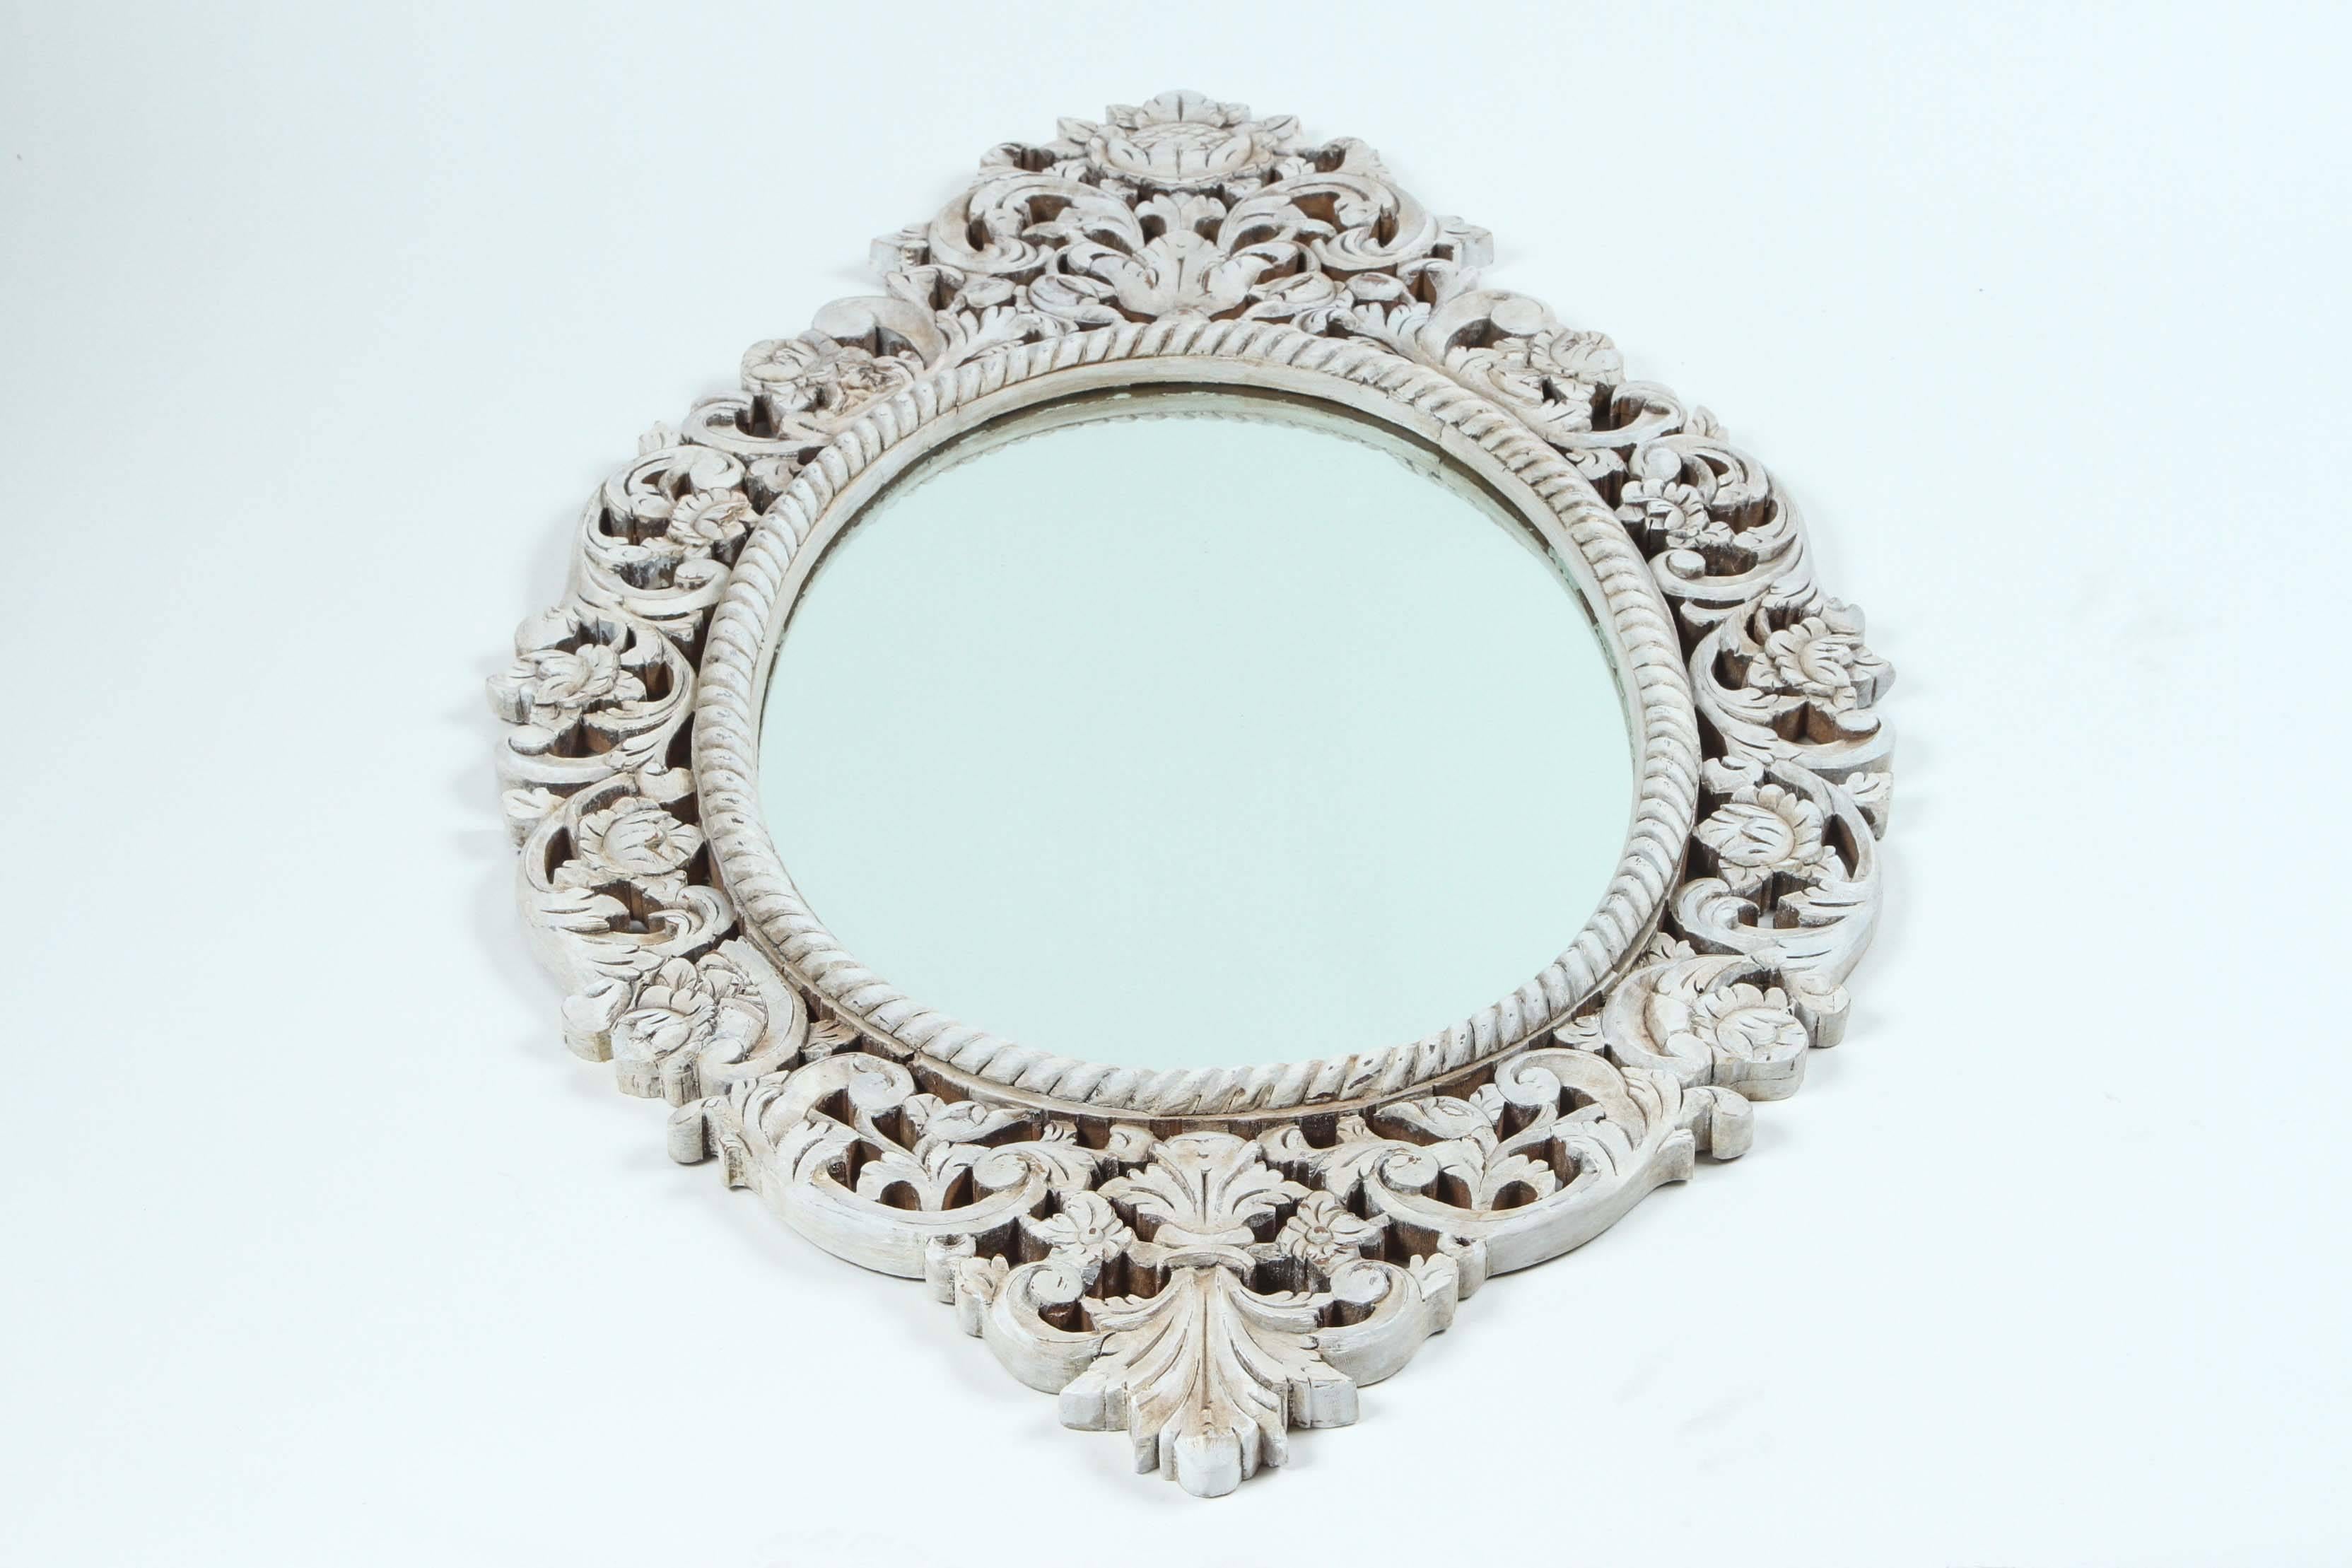 Vintage carved teak frame with oval mirror. Wood has been newly finished with custom antique glaze.